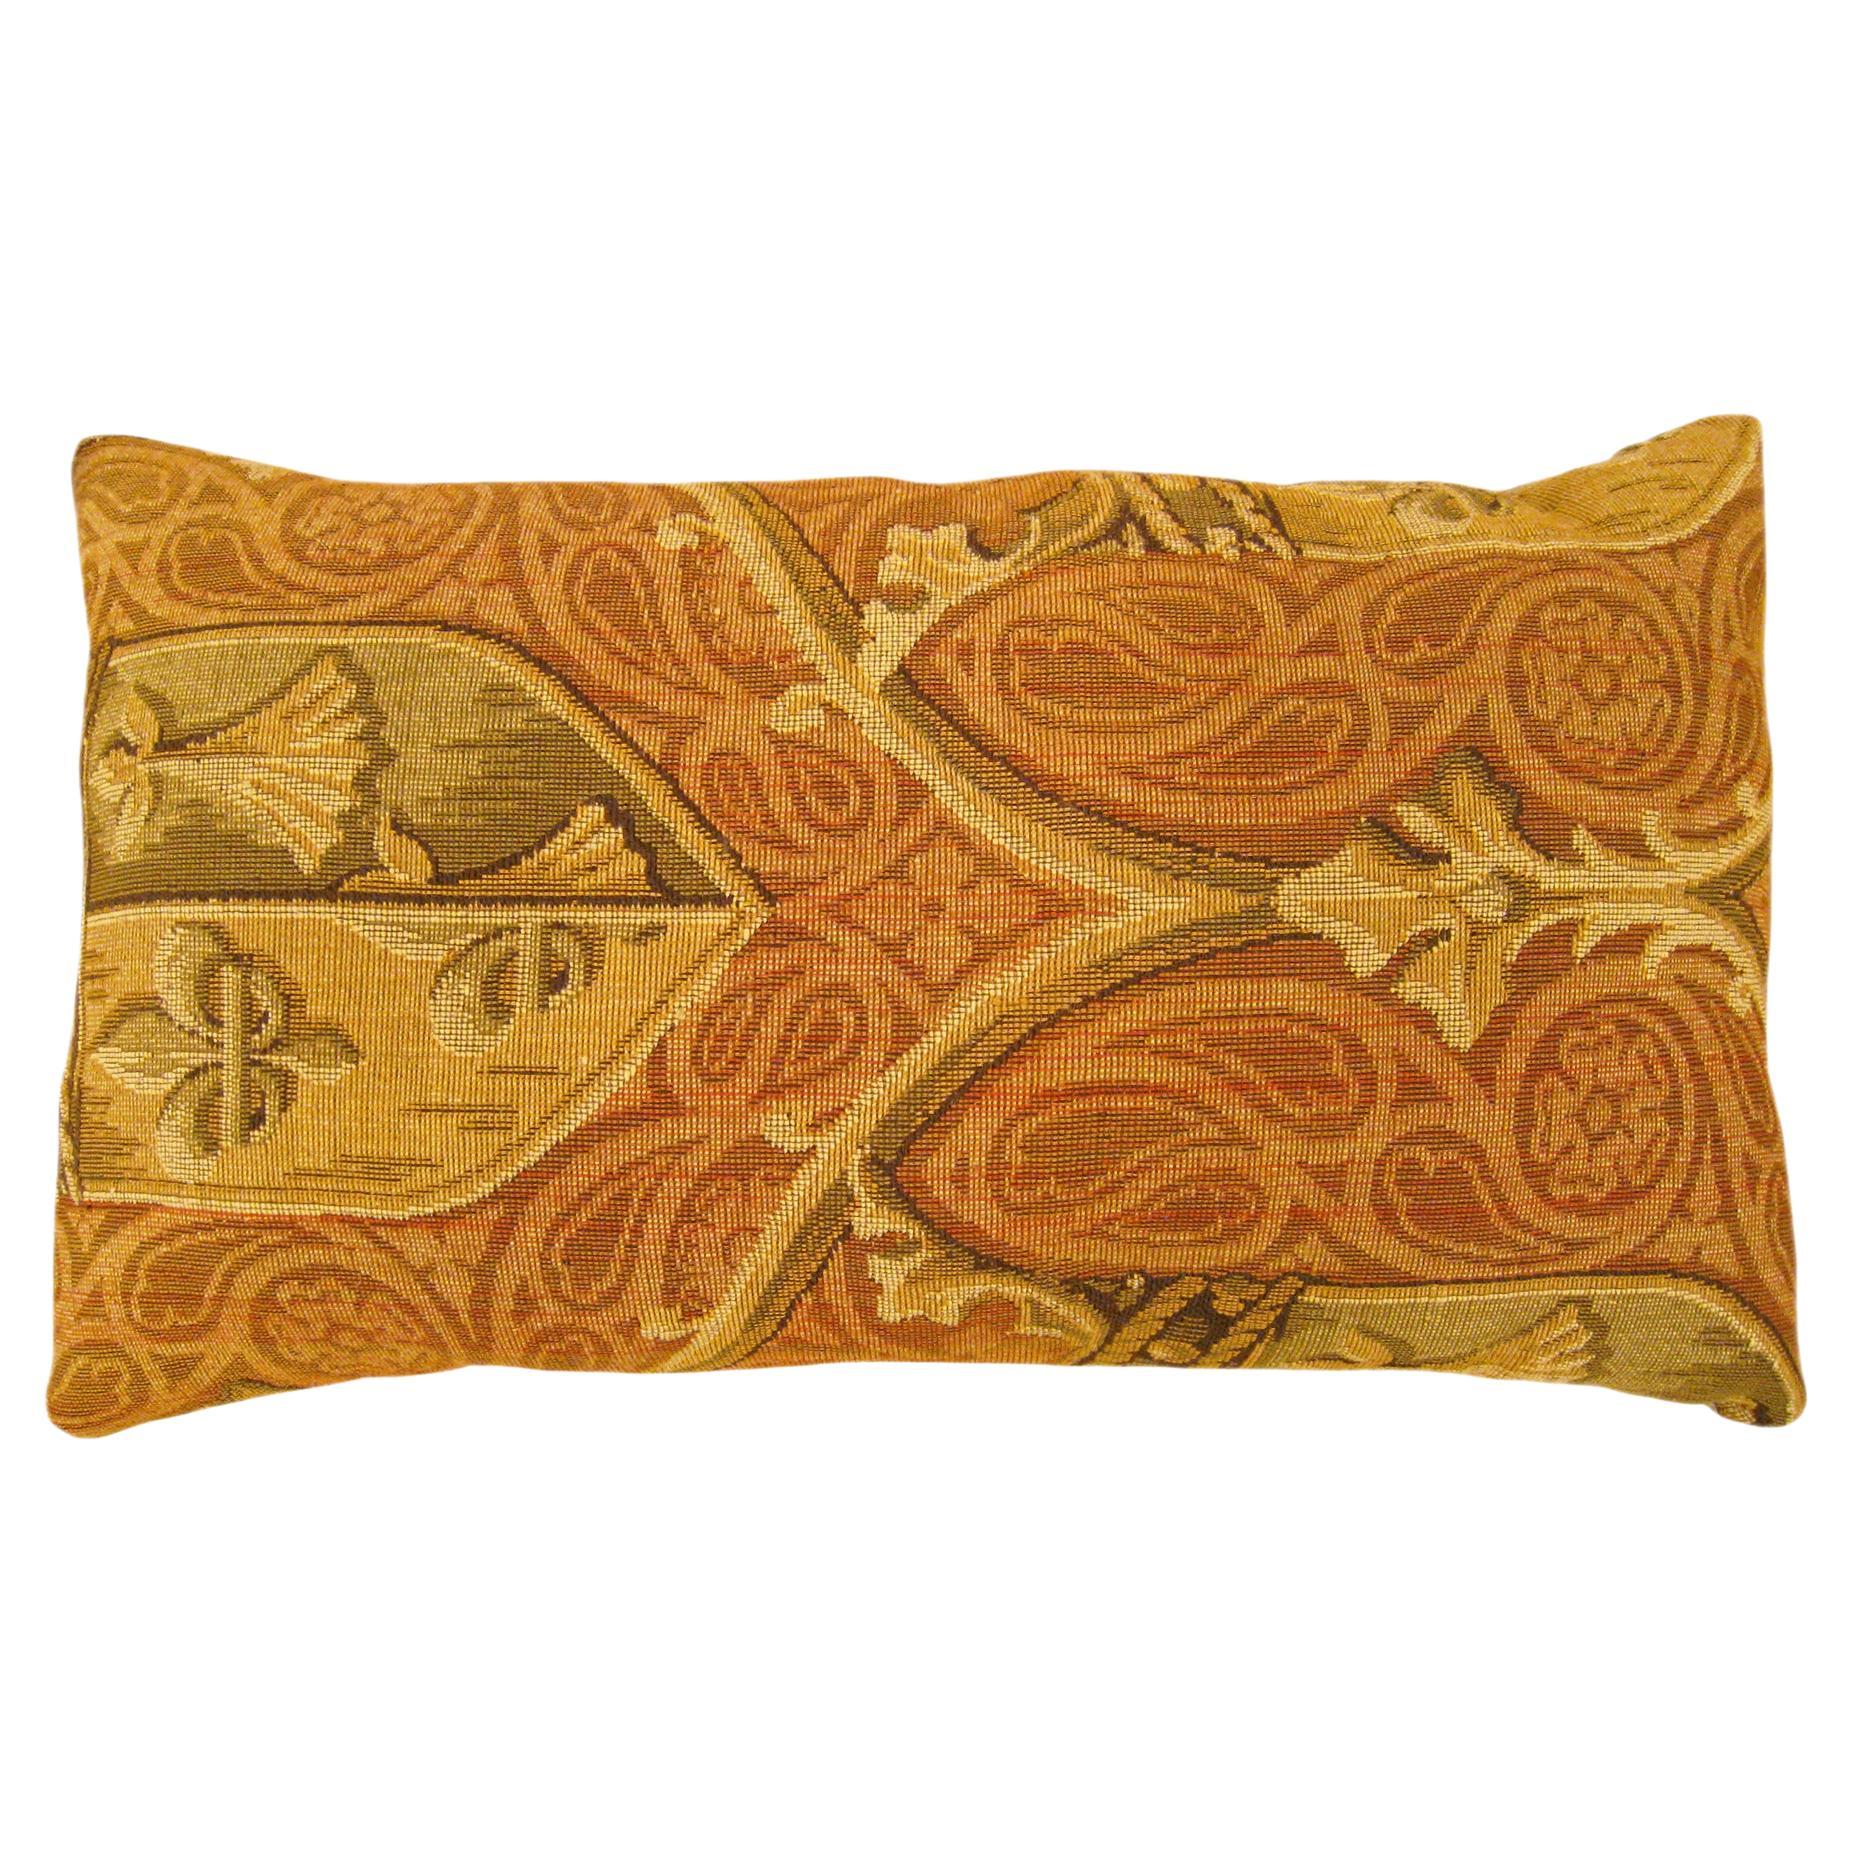 Decorative Antique Jacquard Tapestry Pillow with A Symmetrical Design Allover For Sale